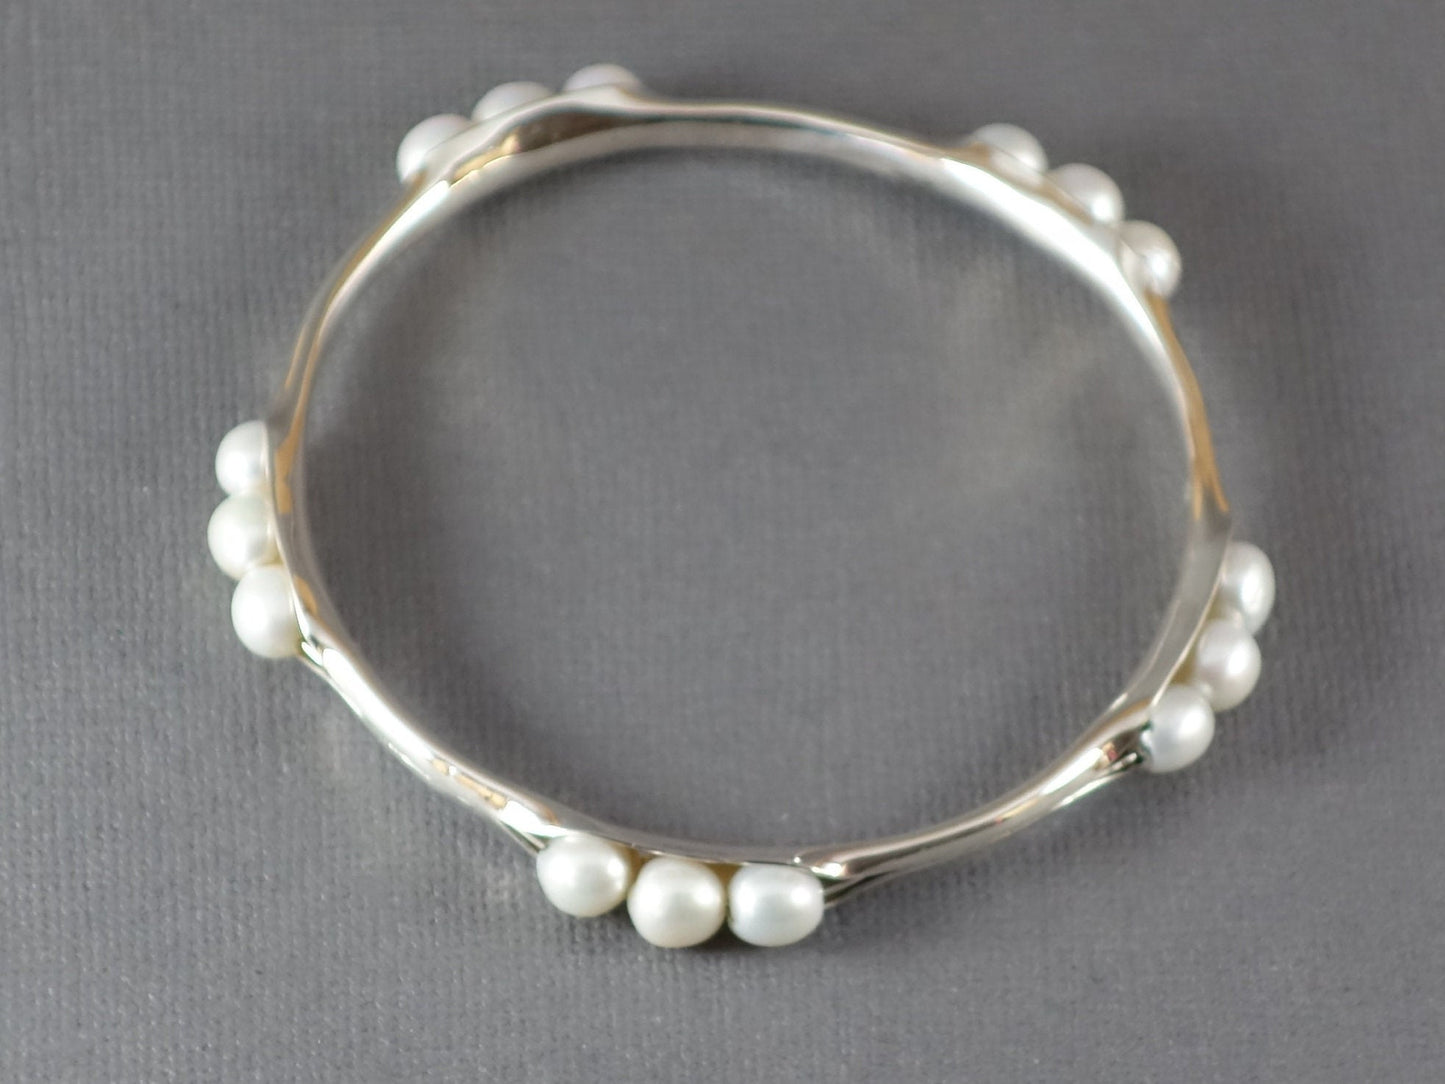 Anticlastic Bangle with White Pearls, Silver Bangle, 5 station